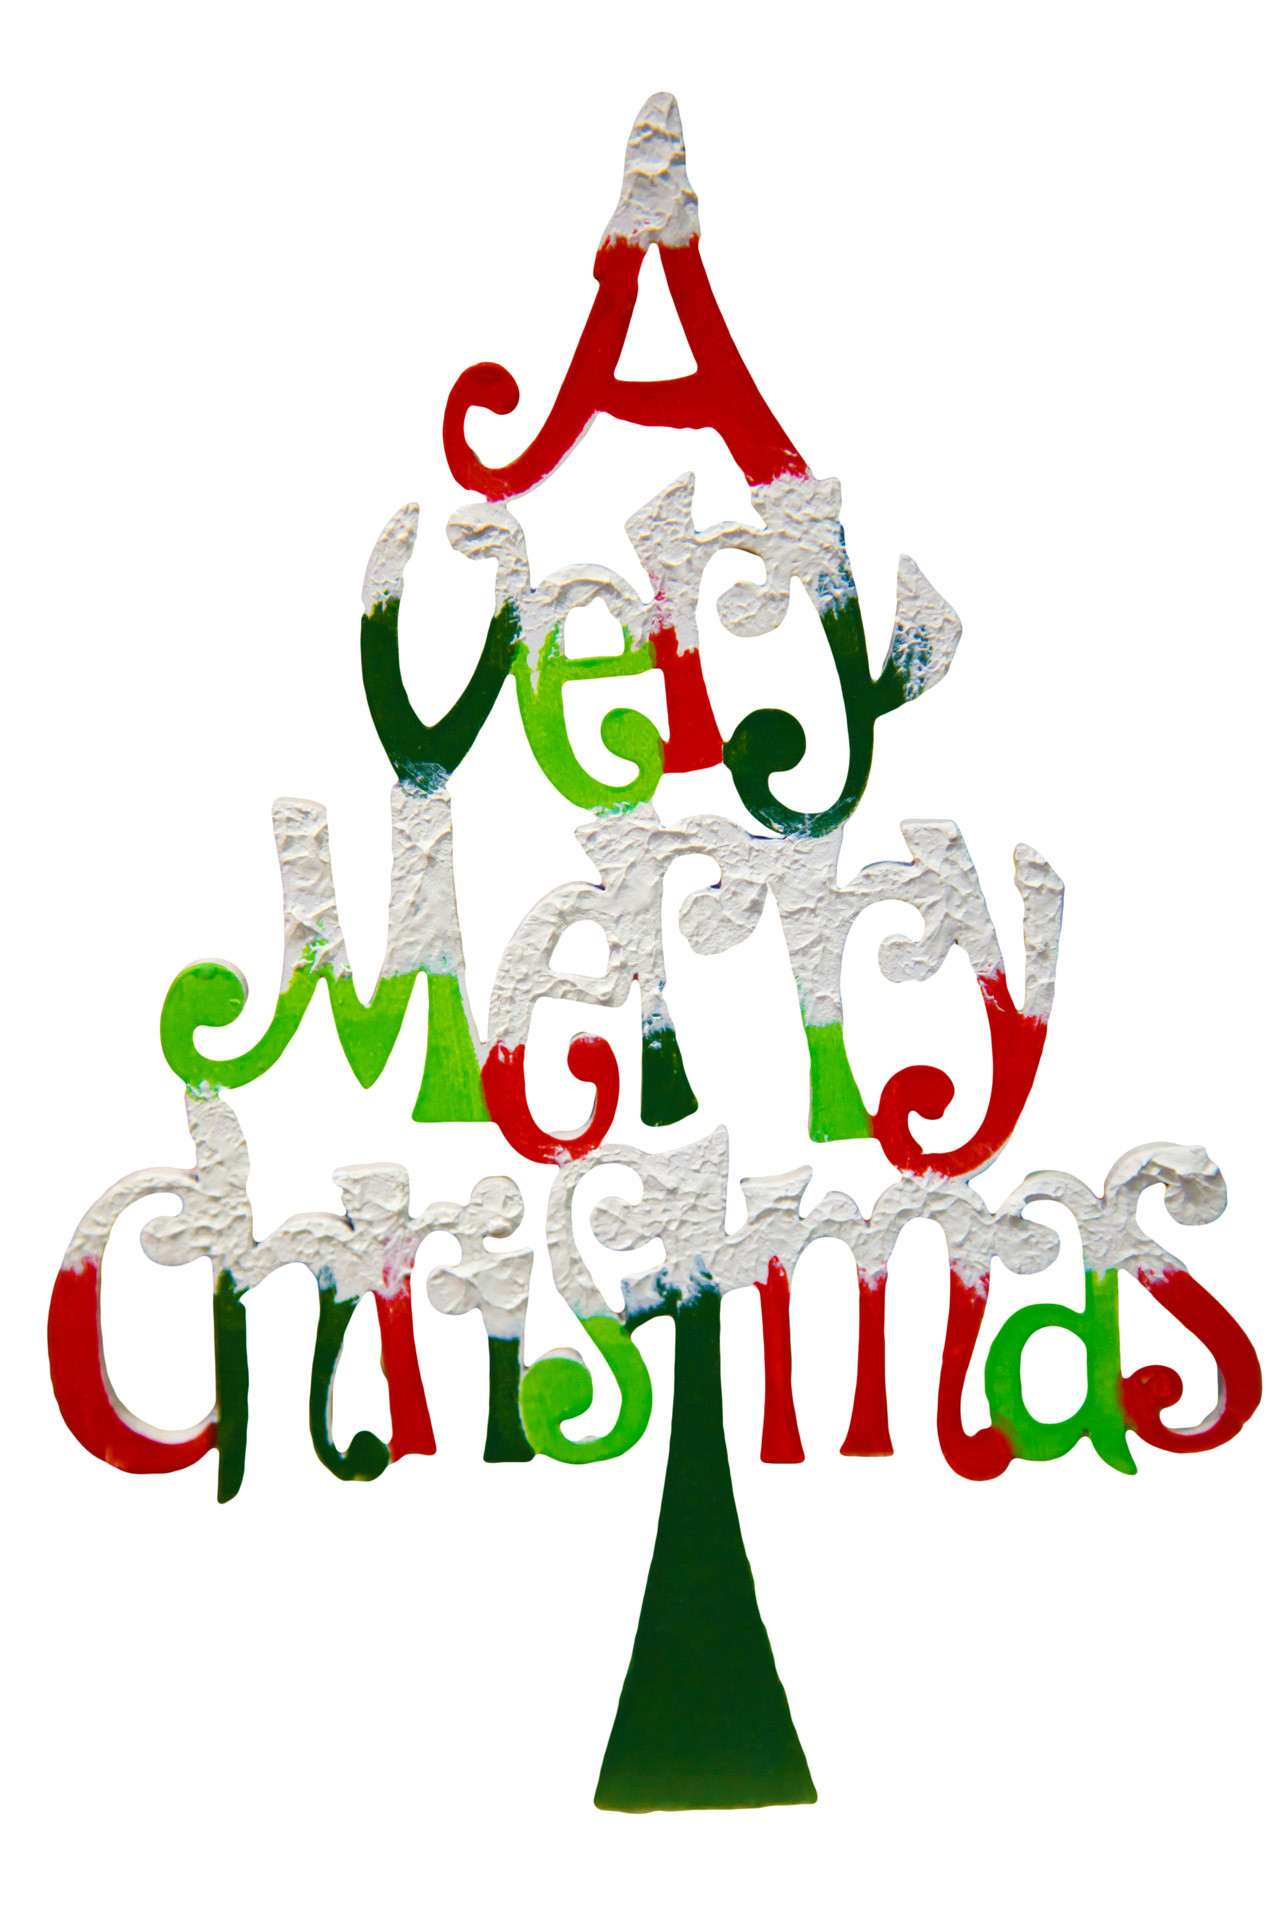 12 Free Clip Art Words Merry Christmas 2014 - Online Cards